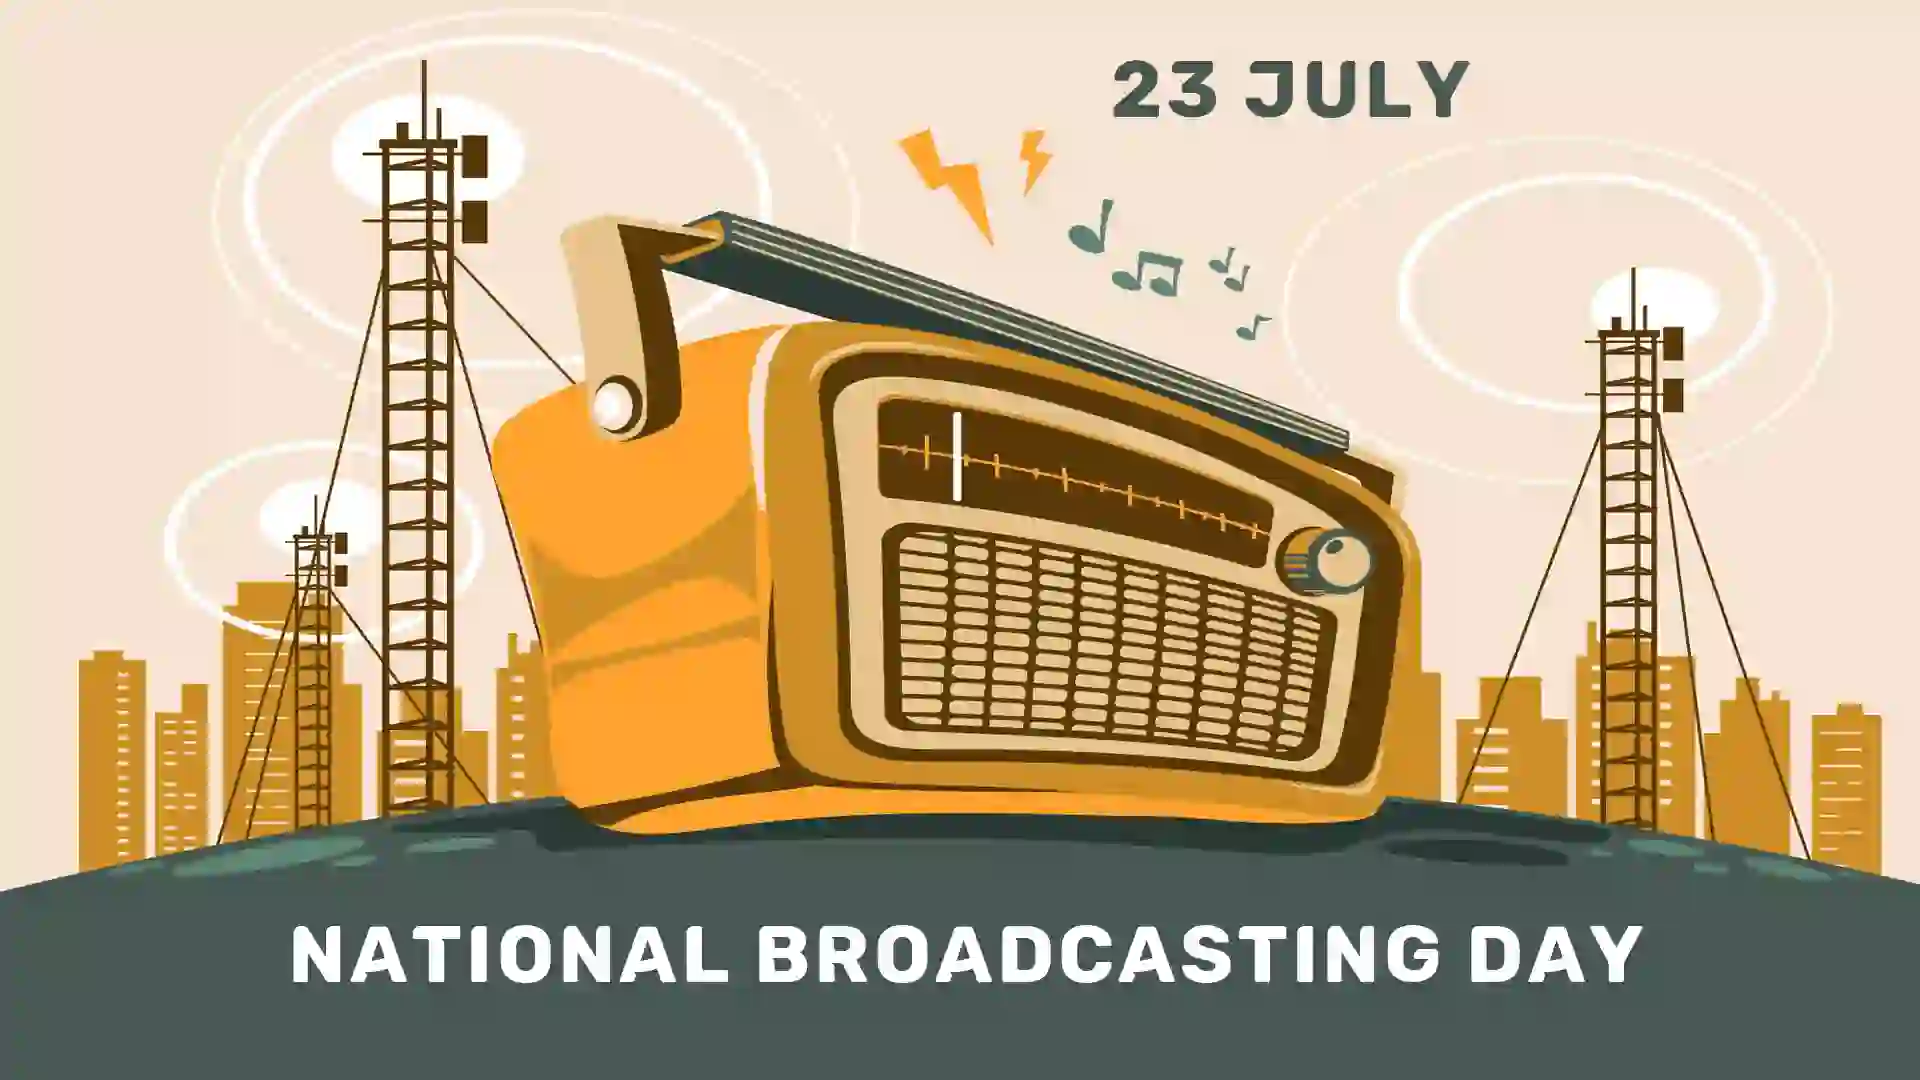 National Broadcasting Day This Post Design By The Revolution Deshbhakt Hindustani